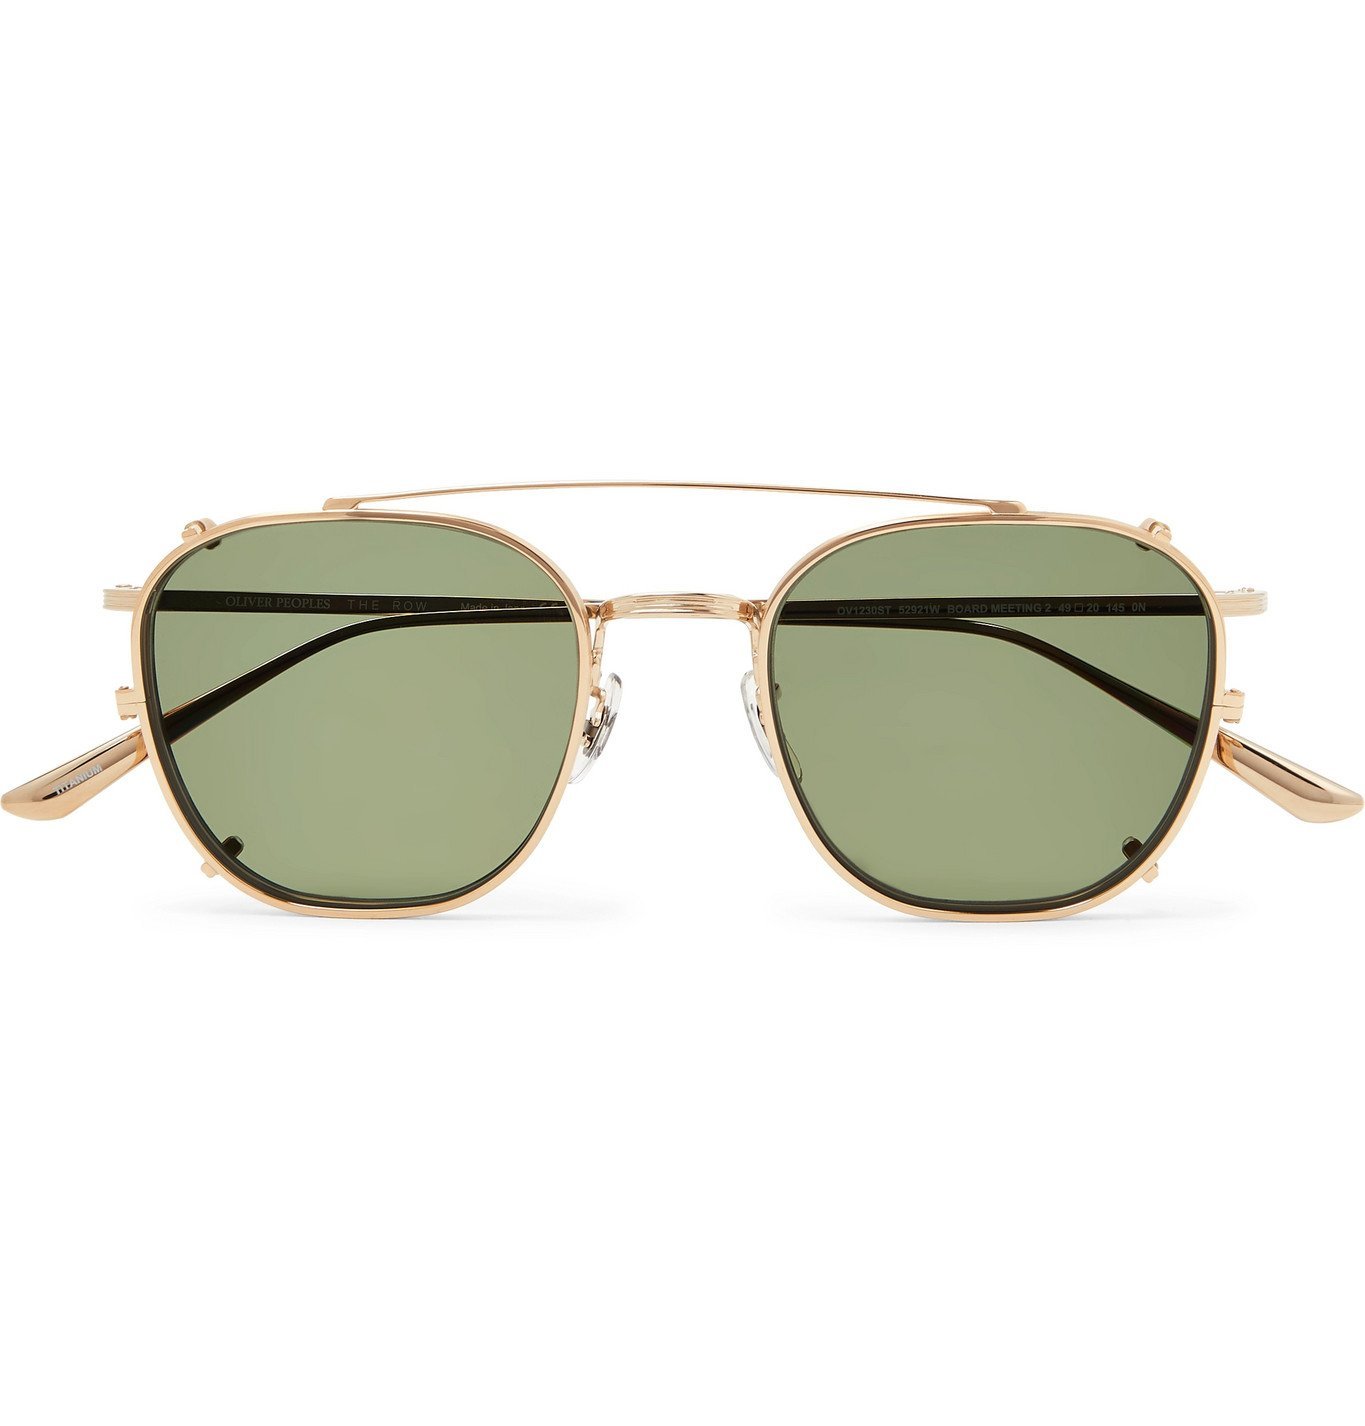 The Row - Oliver Peoples Board Meeting 2 Aviator-Style Gold-Tone Optical  Glasses with Clip-On UV Lenses - Gold The Row